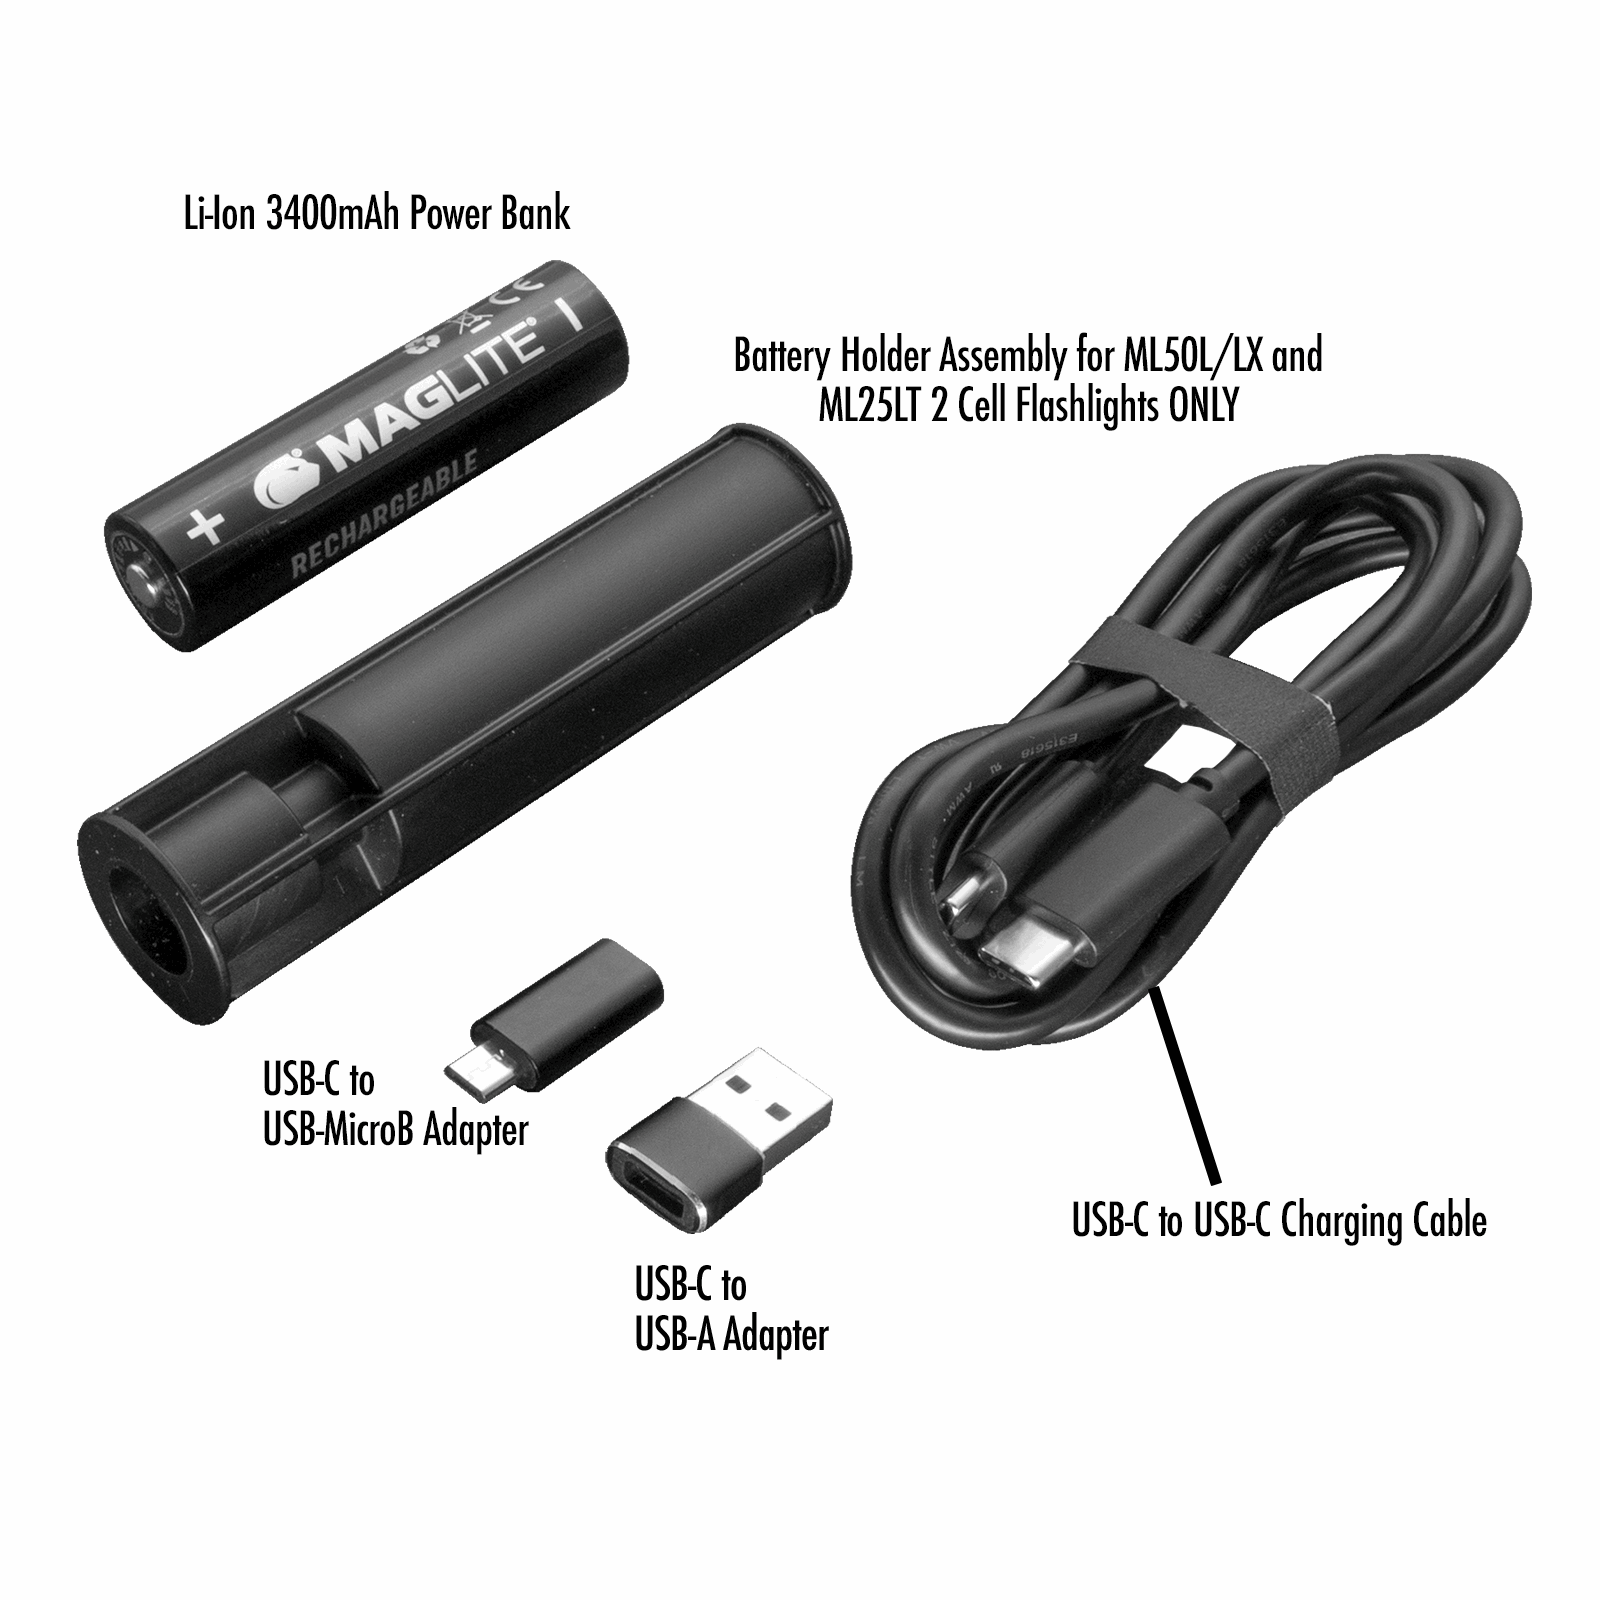 MAG CHARGER® POWERBANK AX64328 Maglite